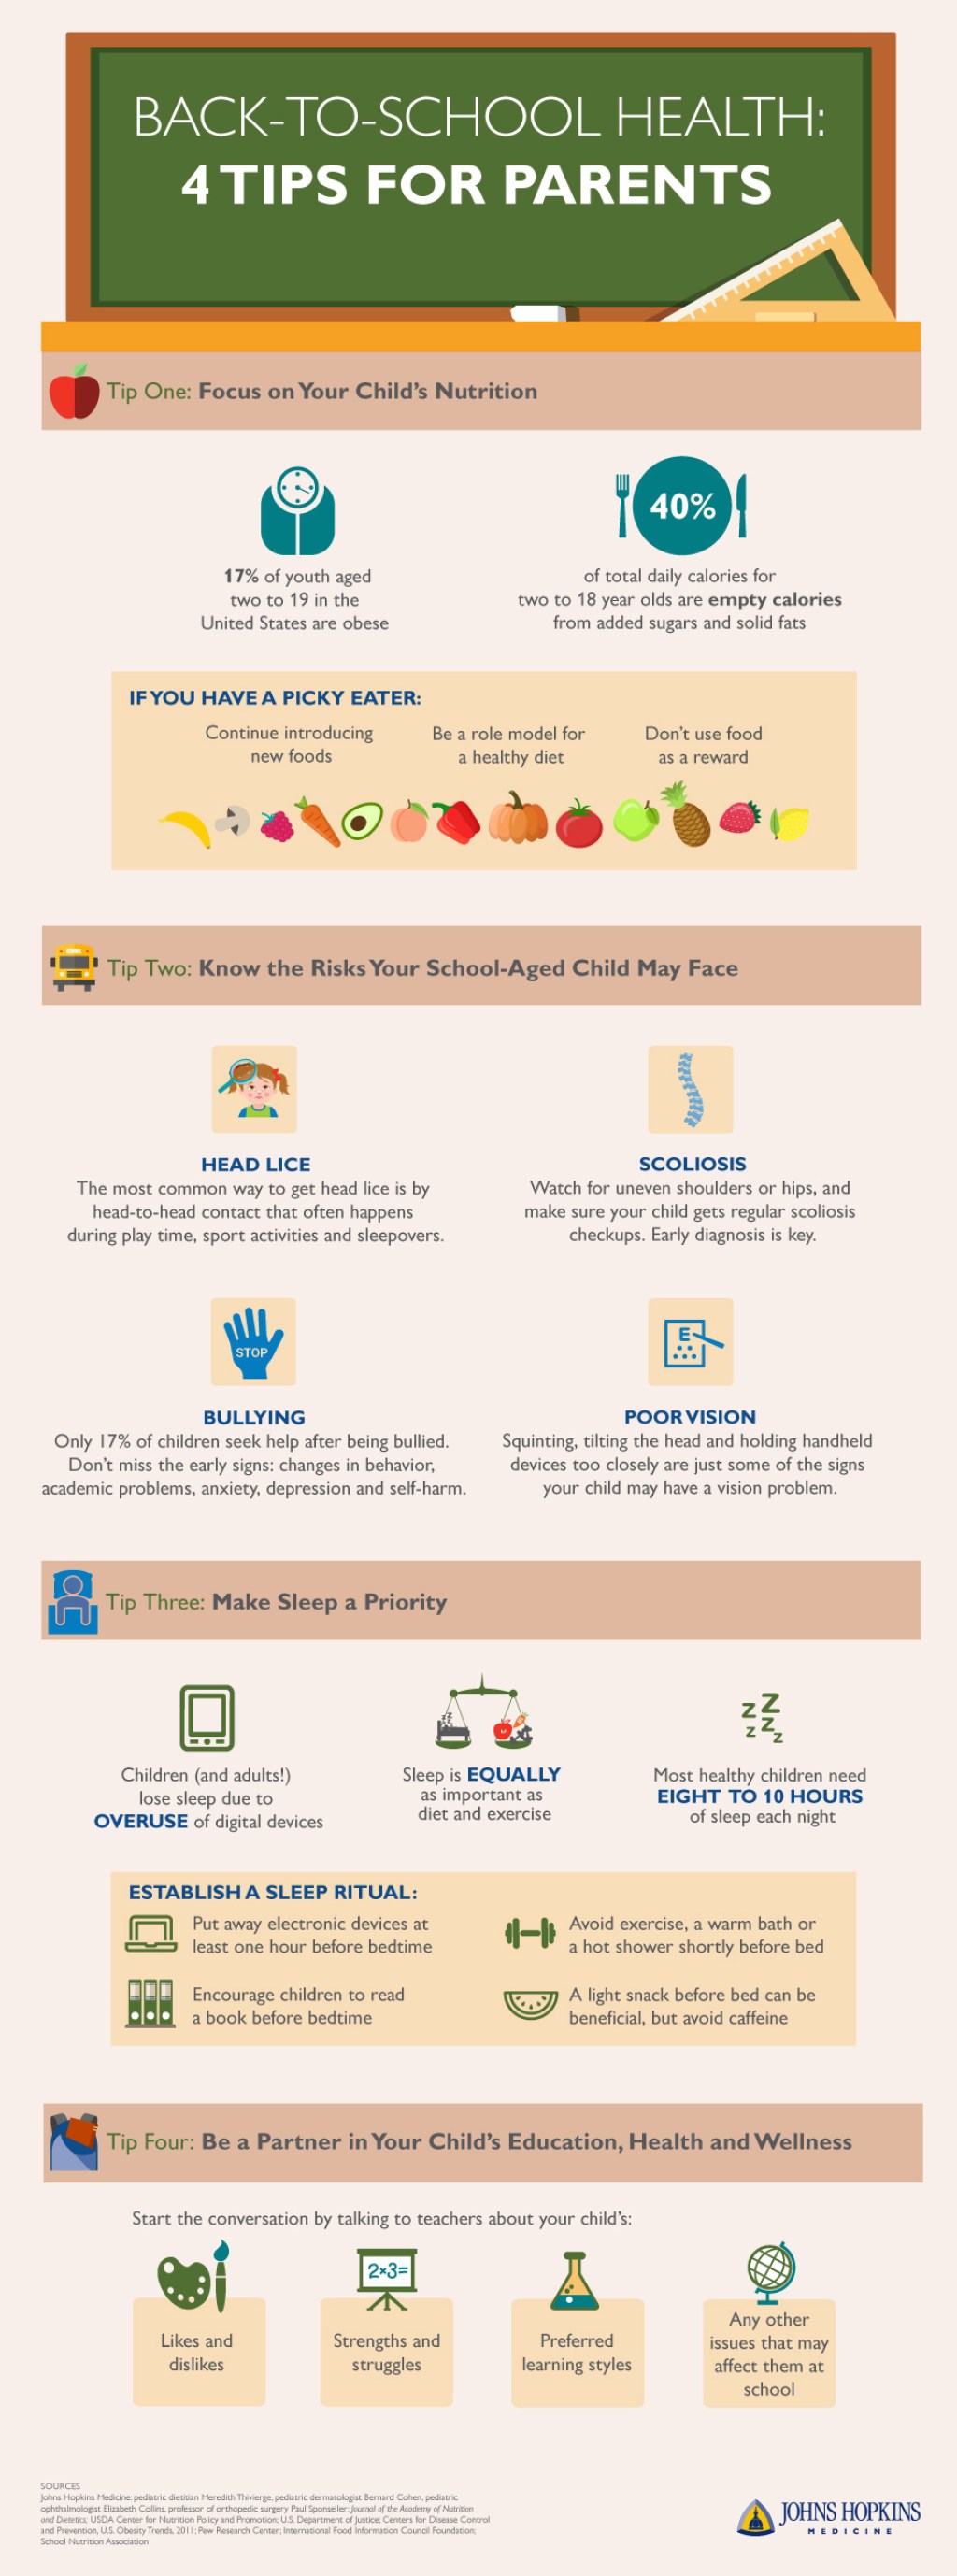 Picture of: Back-to-School Health: Tips for Parents Infographic  Johns